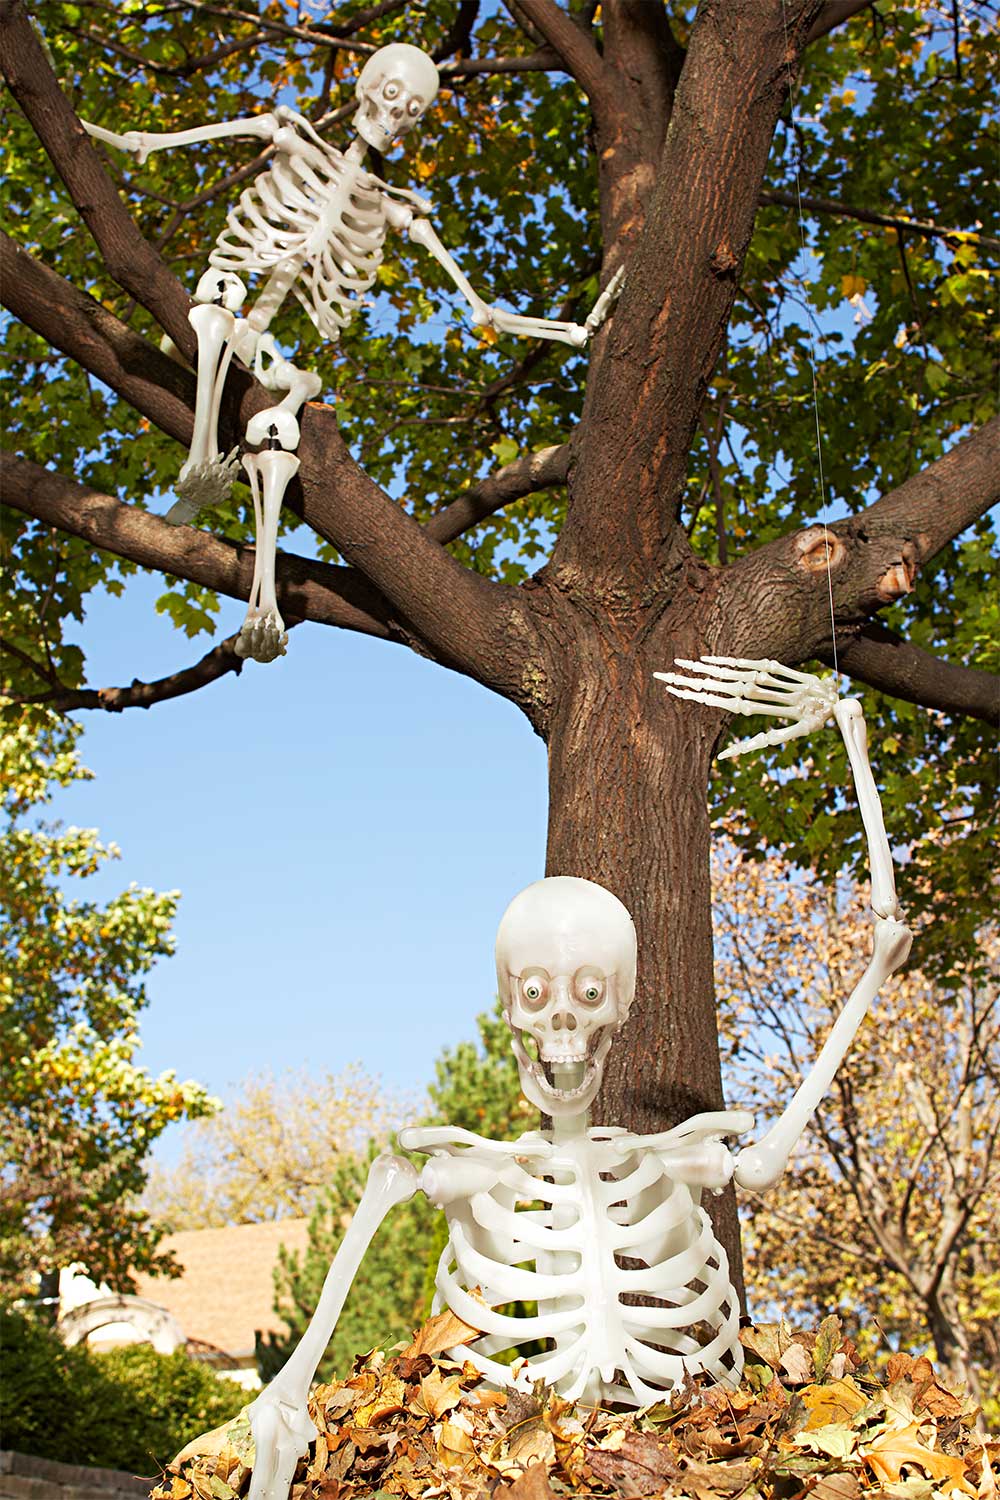 Funny Skeleton Yard Display Discounted Prices | www.micoope.com.gt